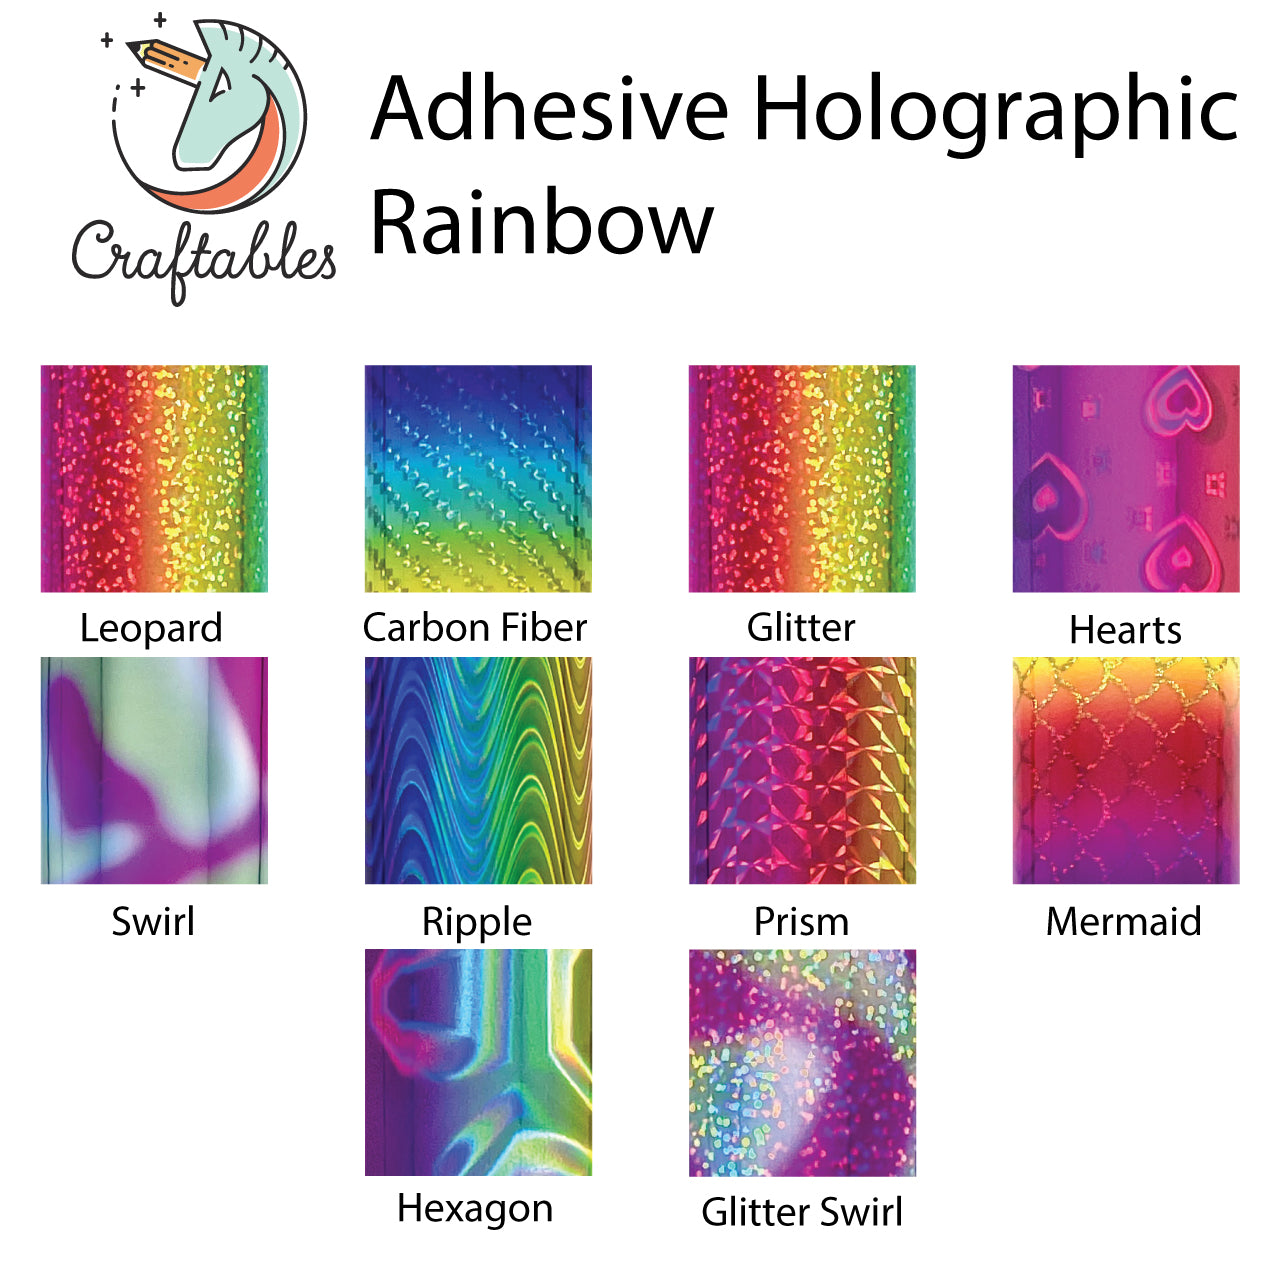 Leopard Rainbow Holographic Adhesive Vinyl Rolls By Craftables